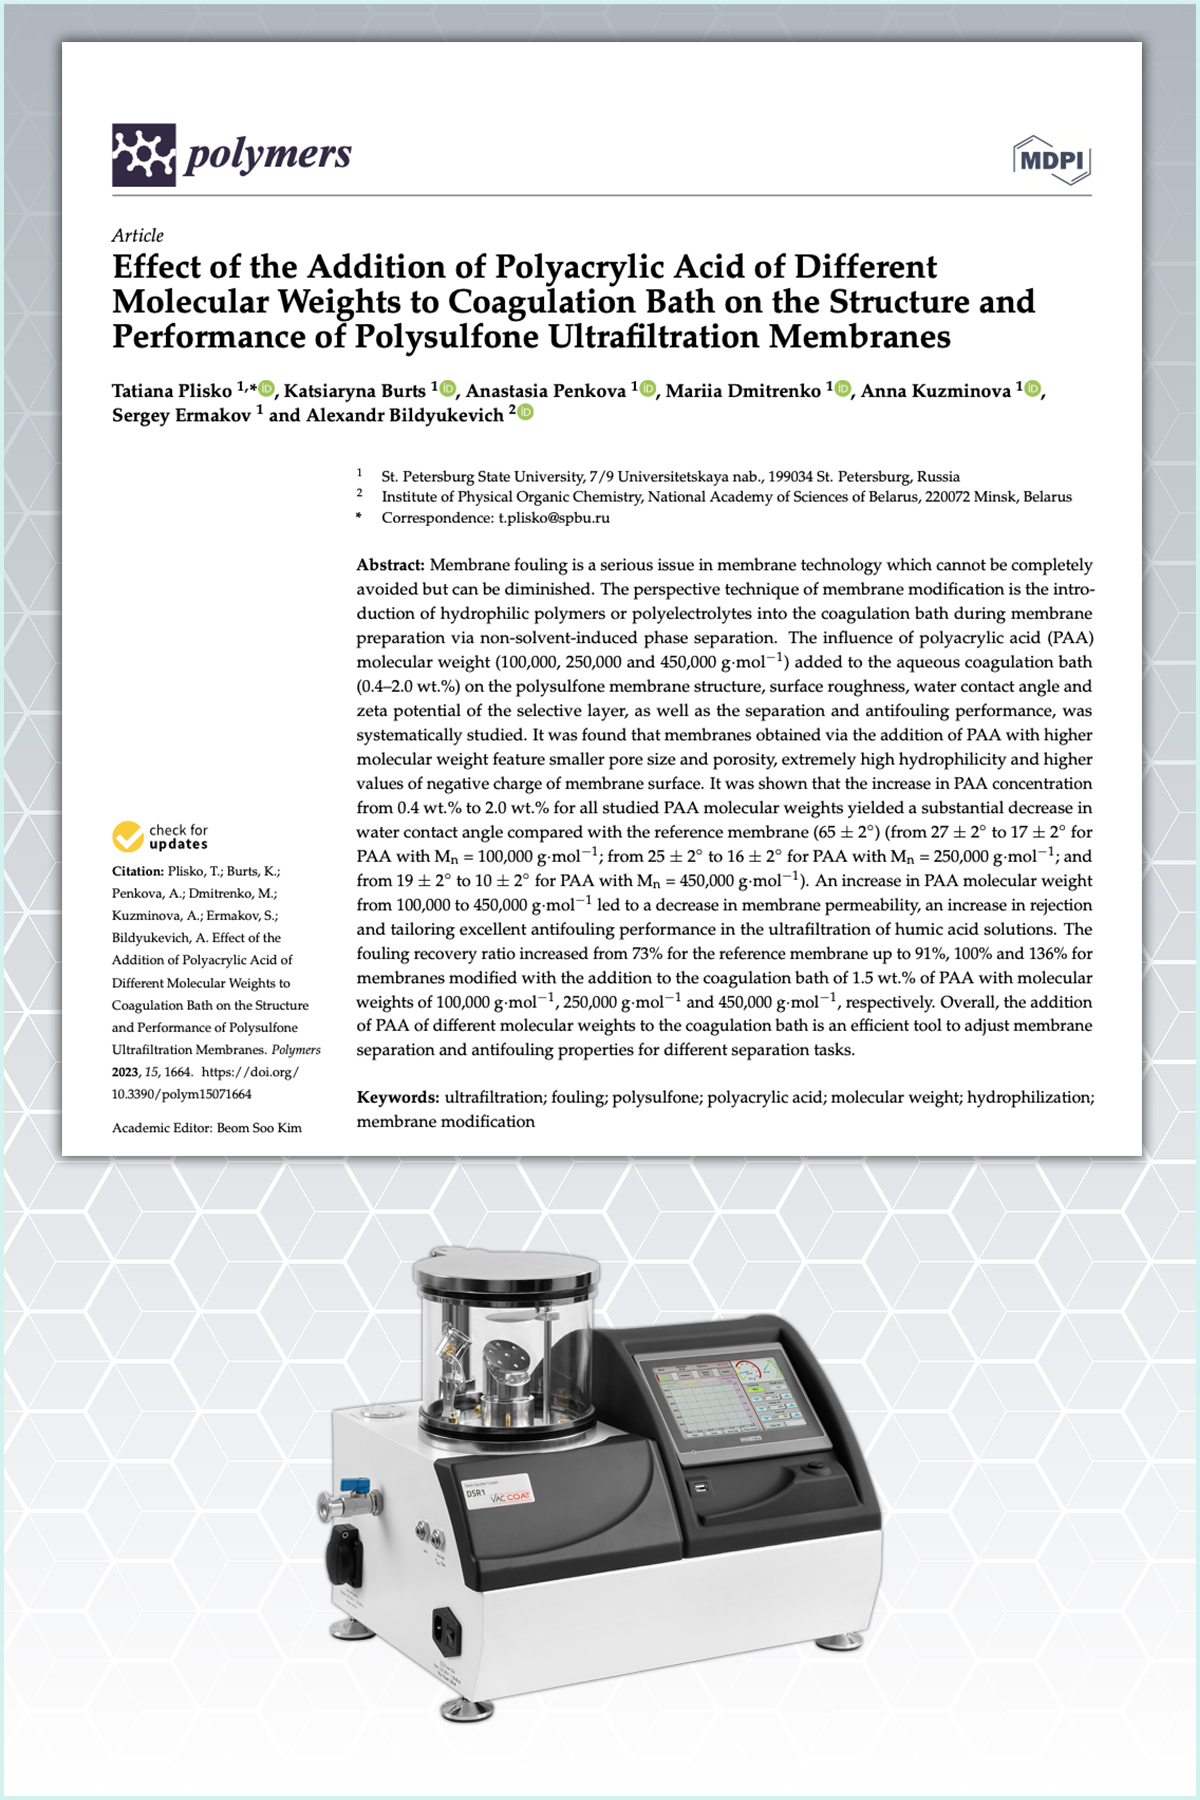 Effect of the Addition of Polyacrylic Acid of Different Molecular Weights to Coagulation Bath on the Structure and Performance of Polysulfone Ultrafiltration Membranes